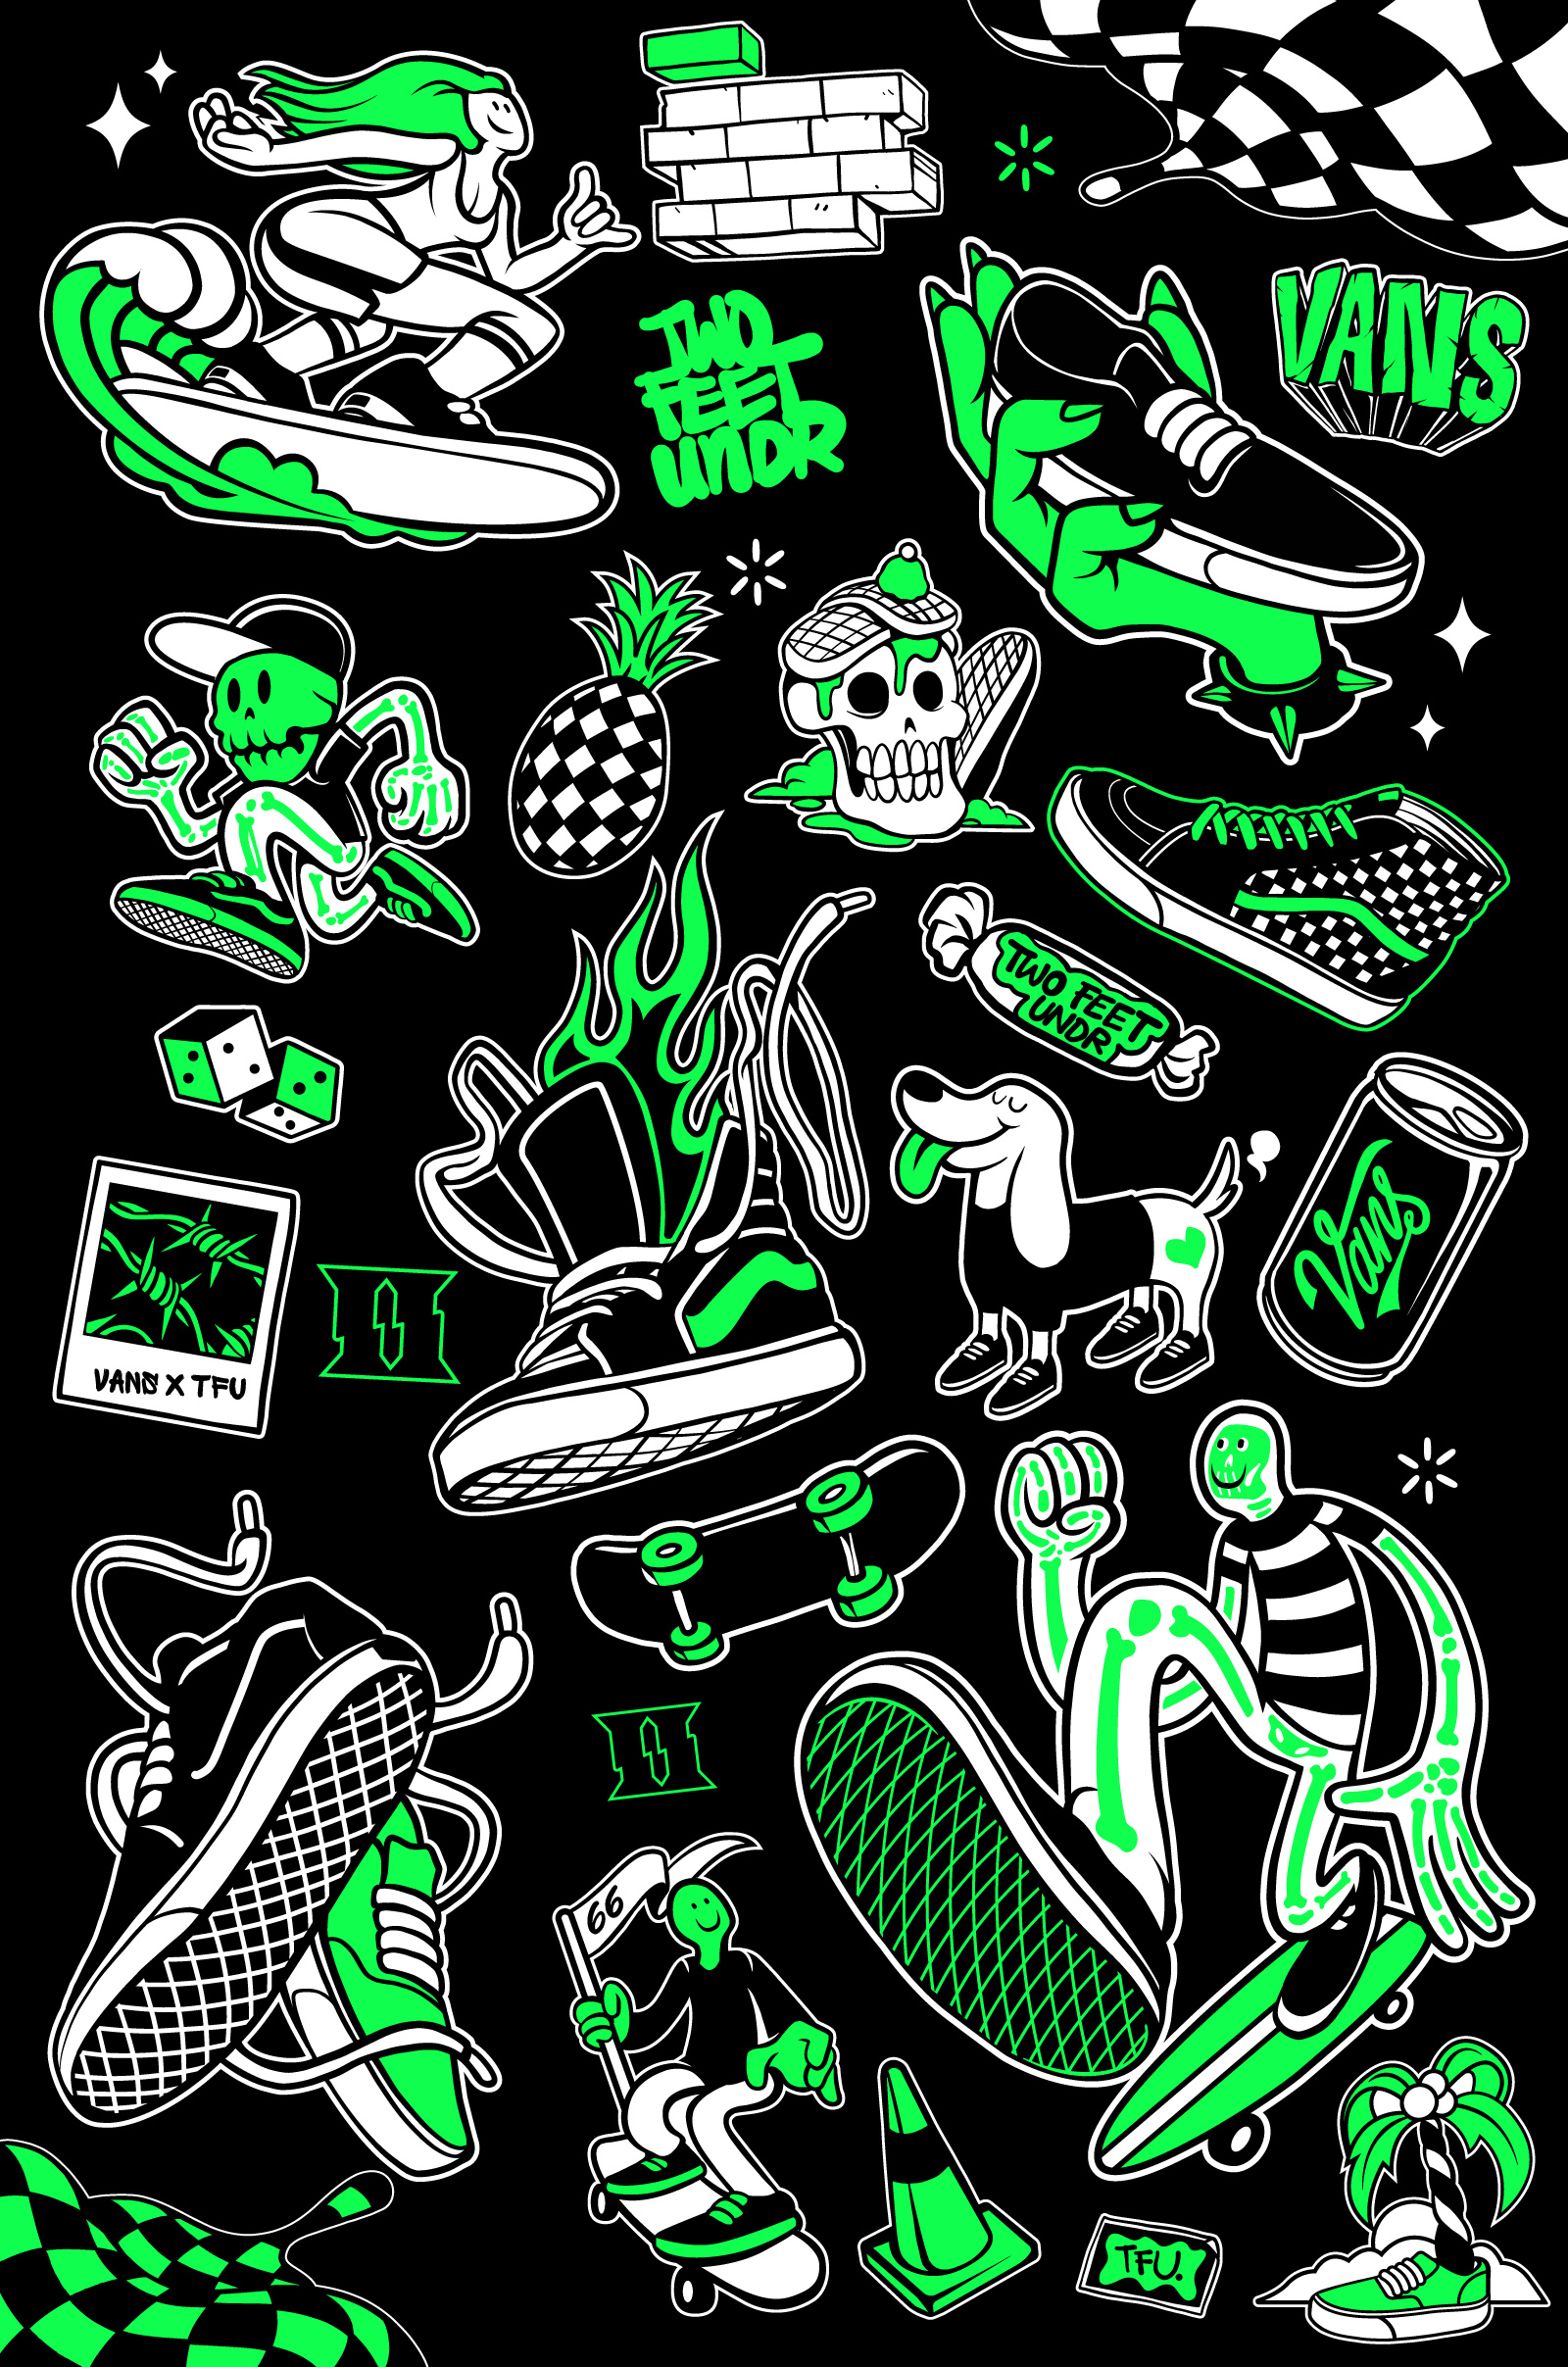 Vans: Manufacturing skateboarding shoes since 1970s, Art. 1600x2420 HD Background.